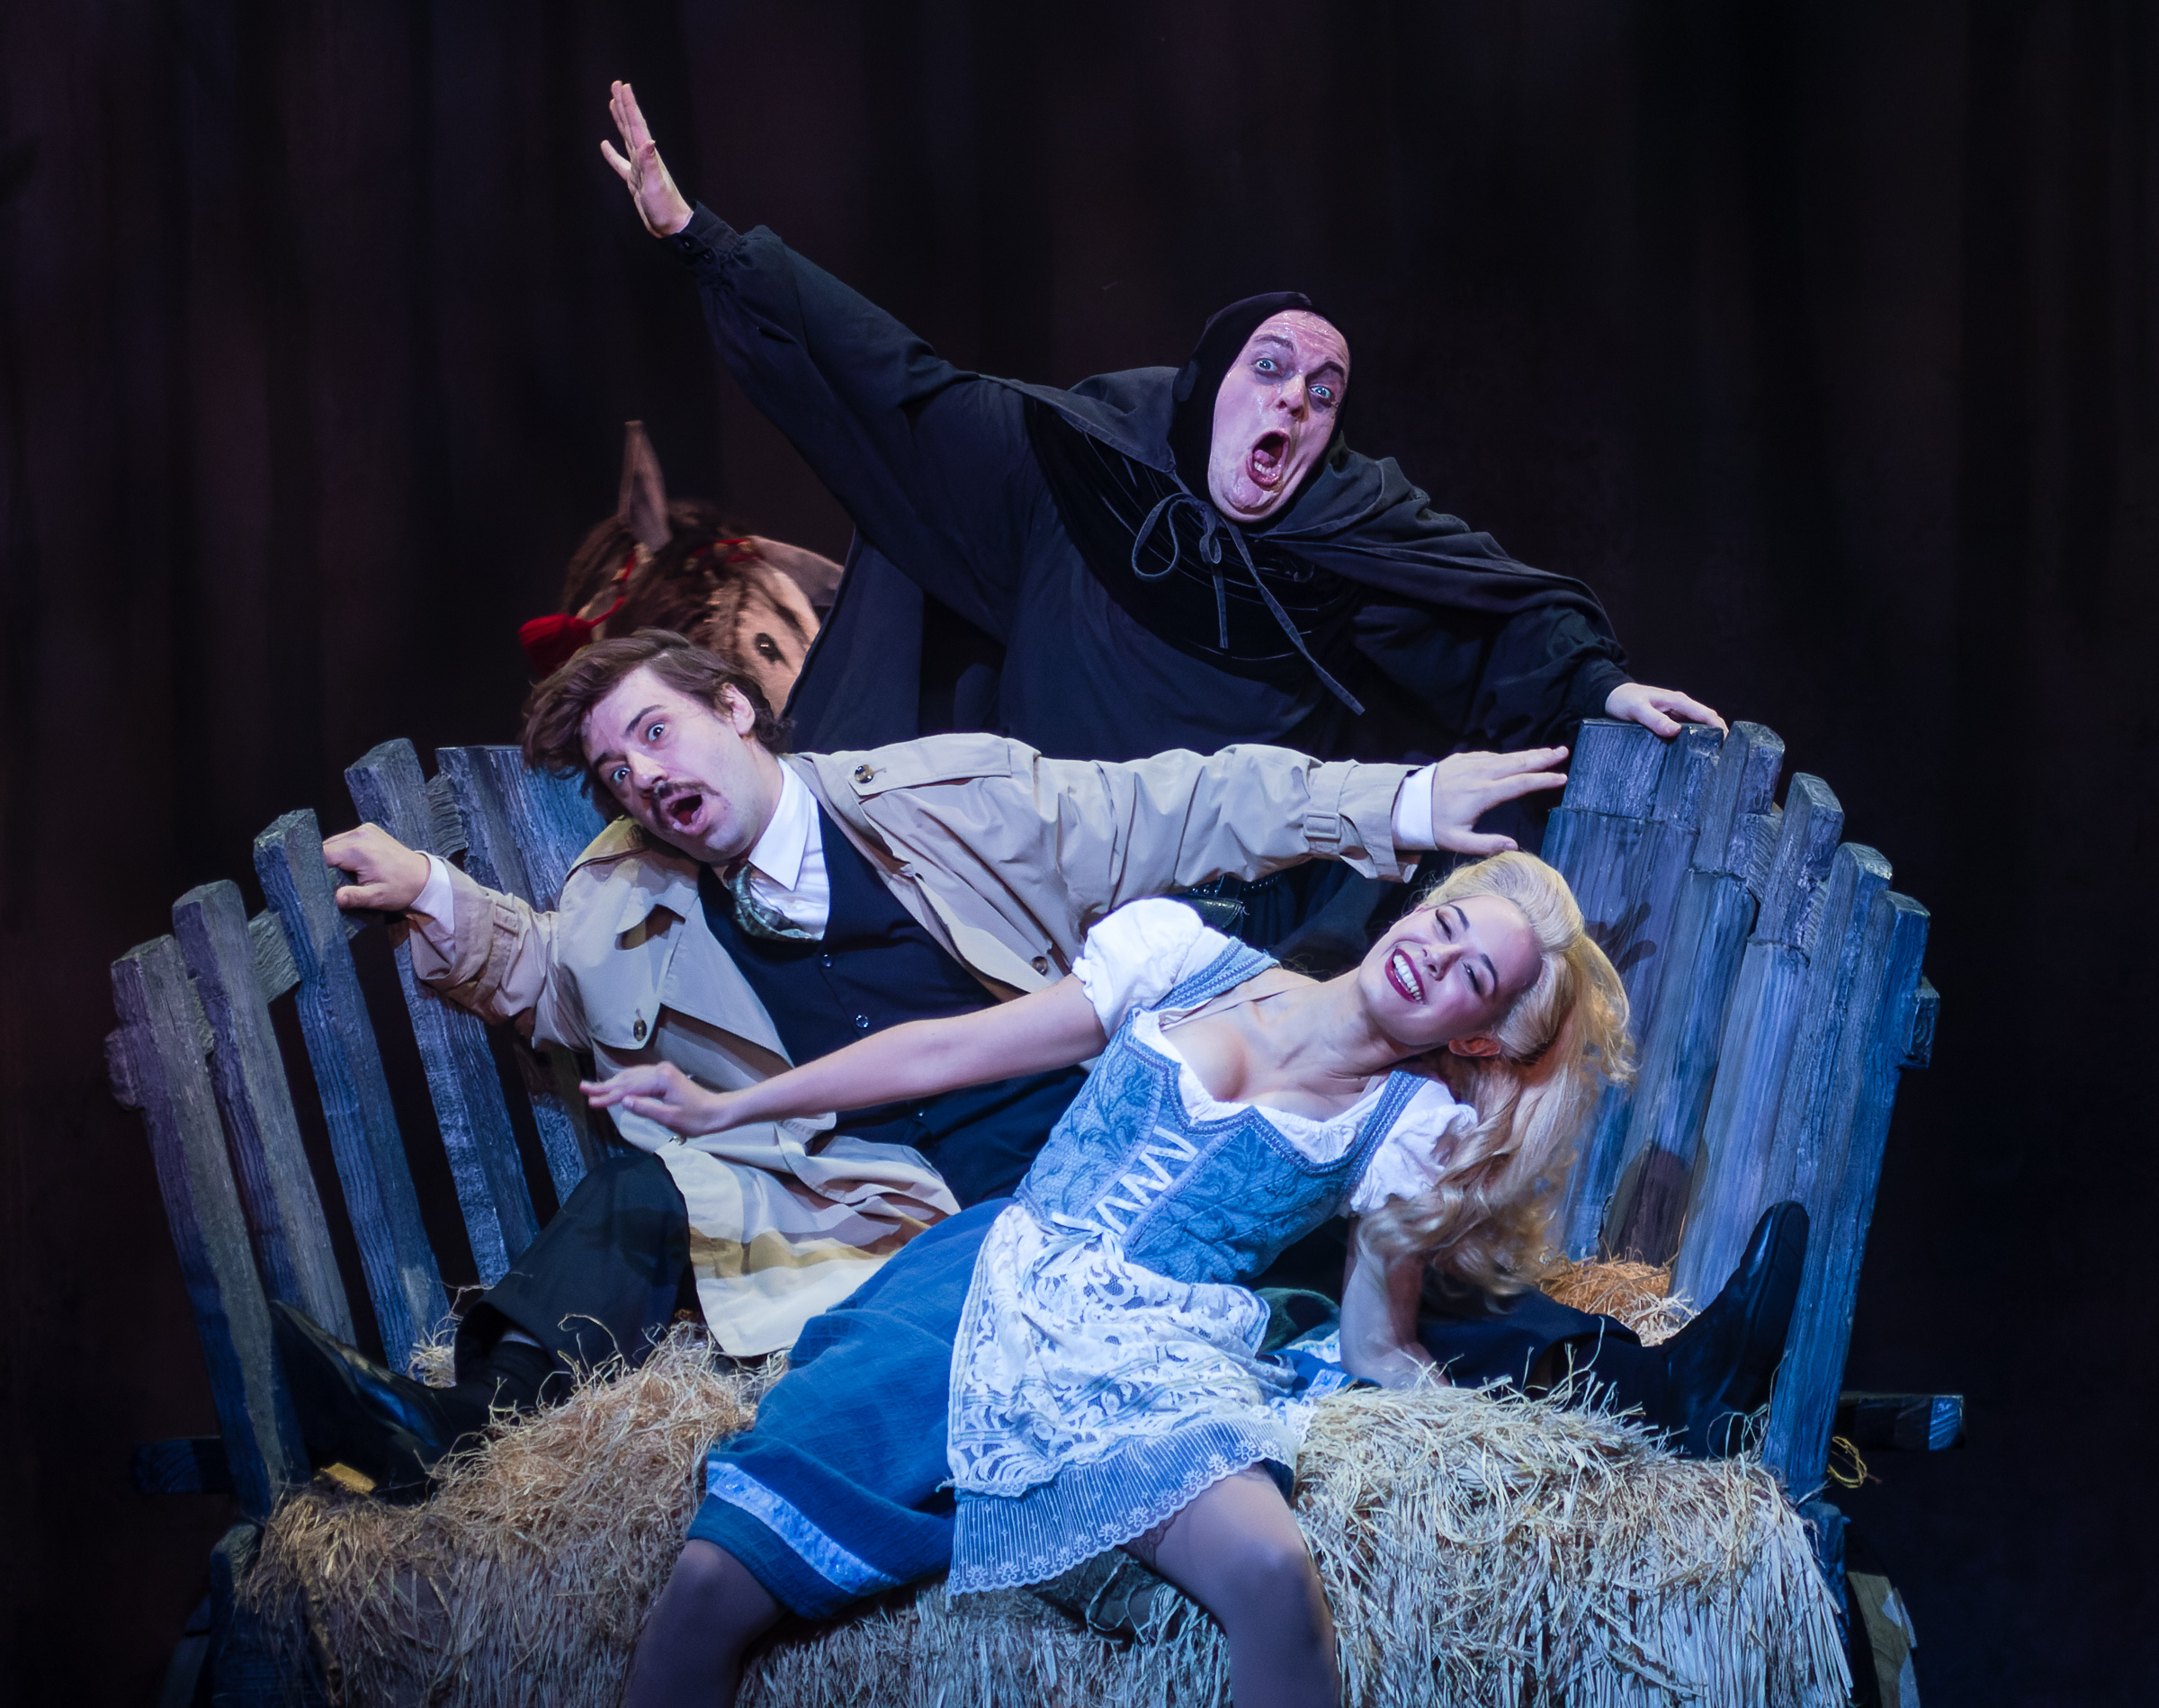 Review: 'Young Frankenstein' taps into film laughs